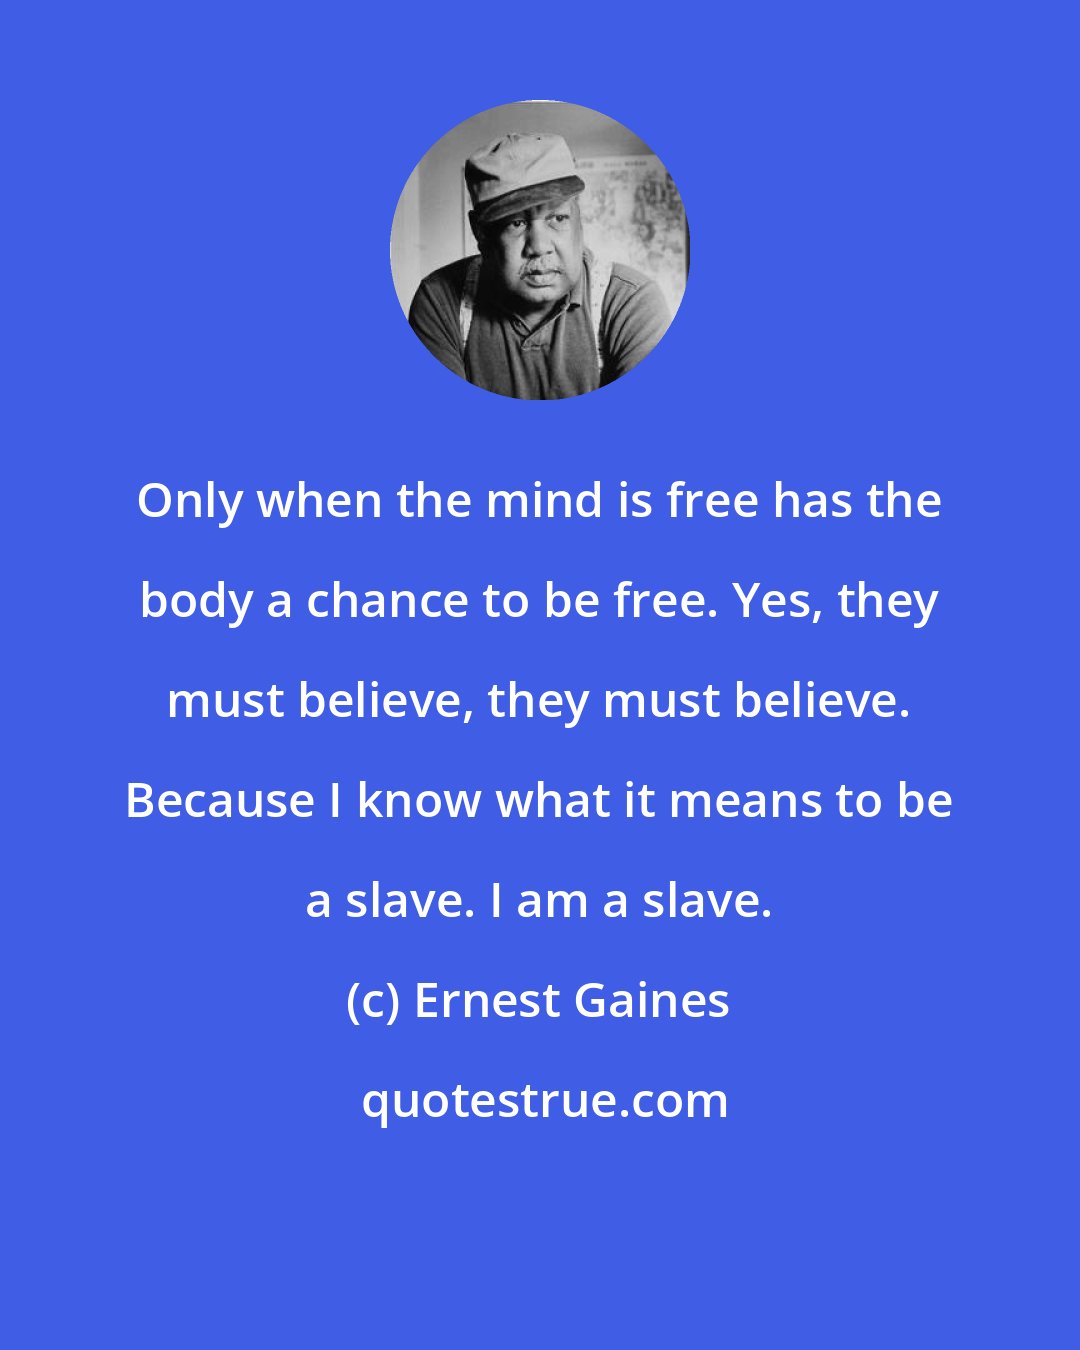 Ernest Gaines: Only when the mind is free has the body a chance to be free. Yes, they must believe, they must believe. Because I know what it means to be a slave. I am a slave.